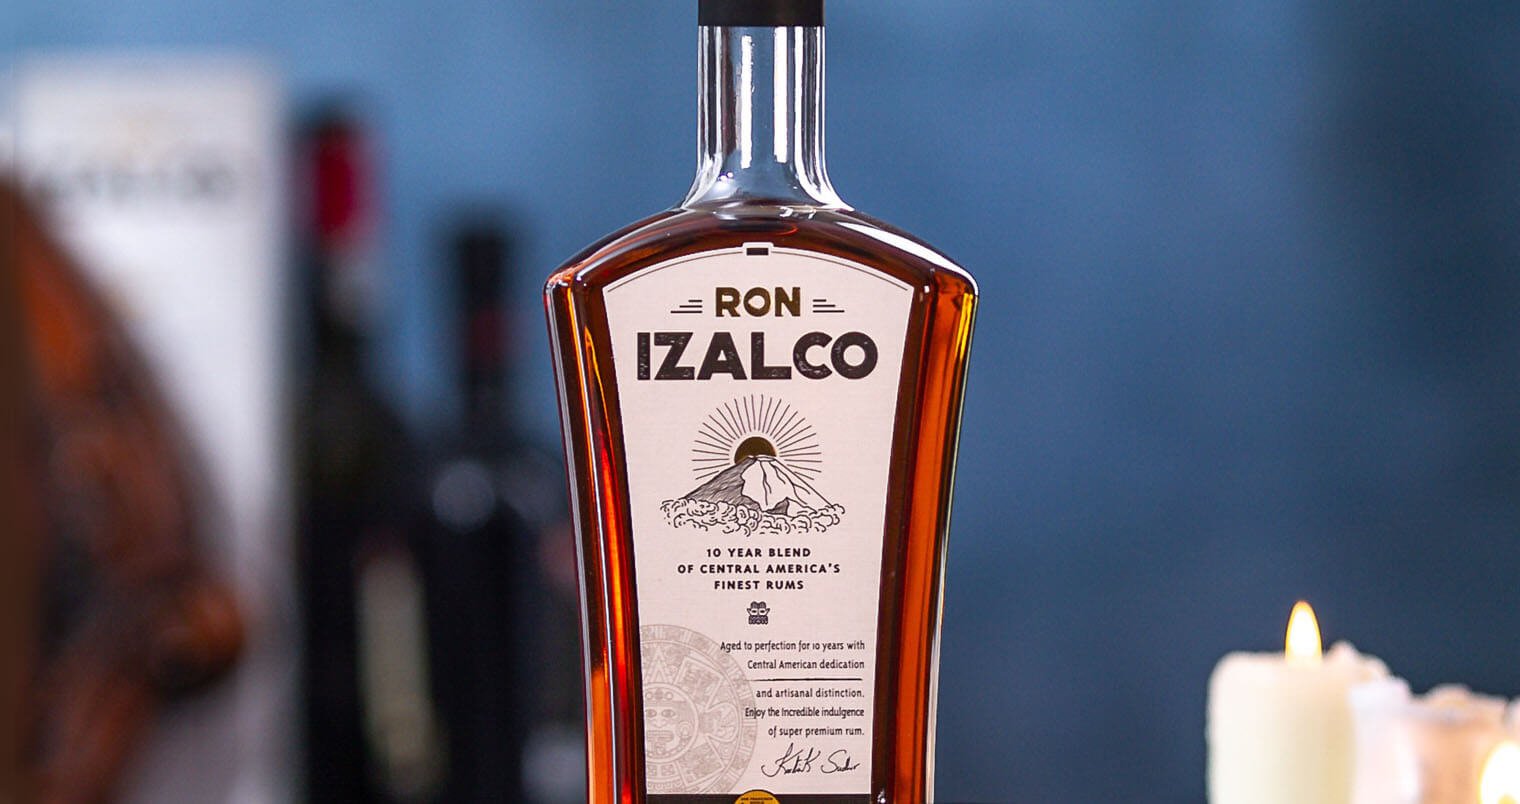 Ron Izalco Bottle and drink, featured image